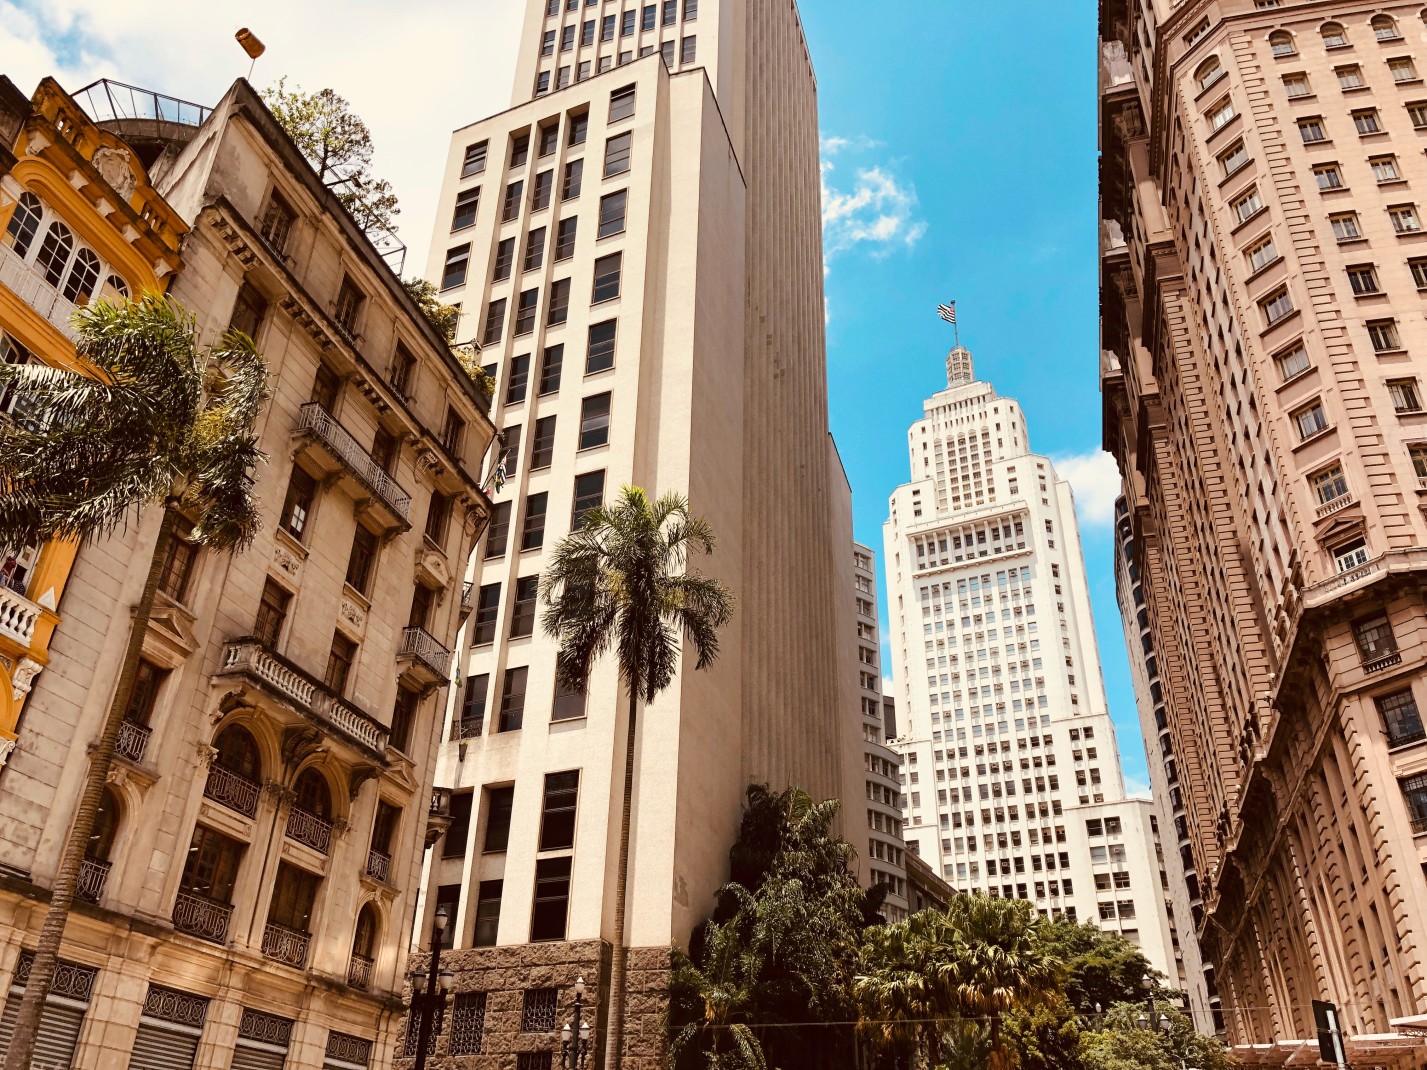 Tall white and brown buildings with green palm trees in São Paulo, Brazil.